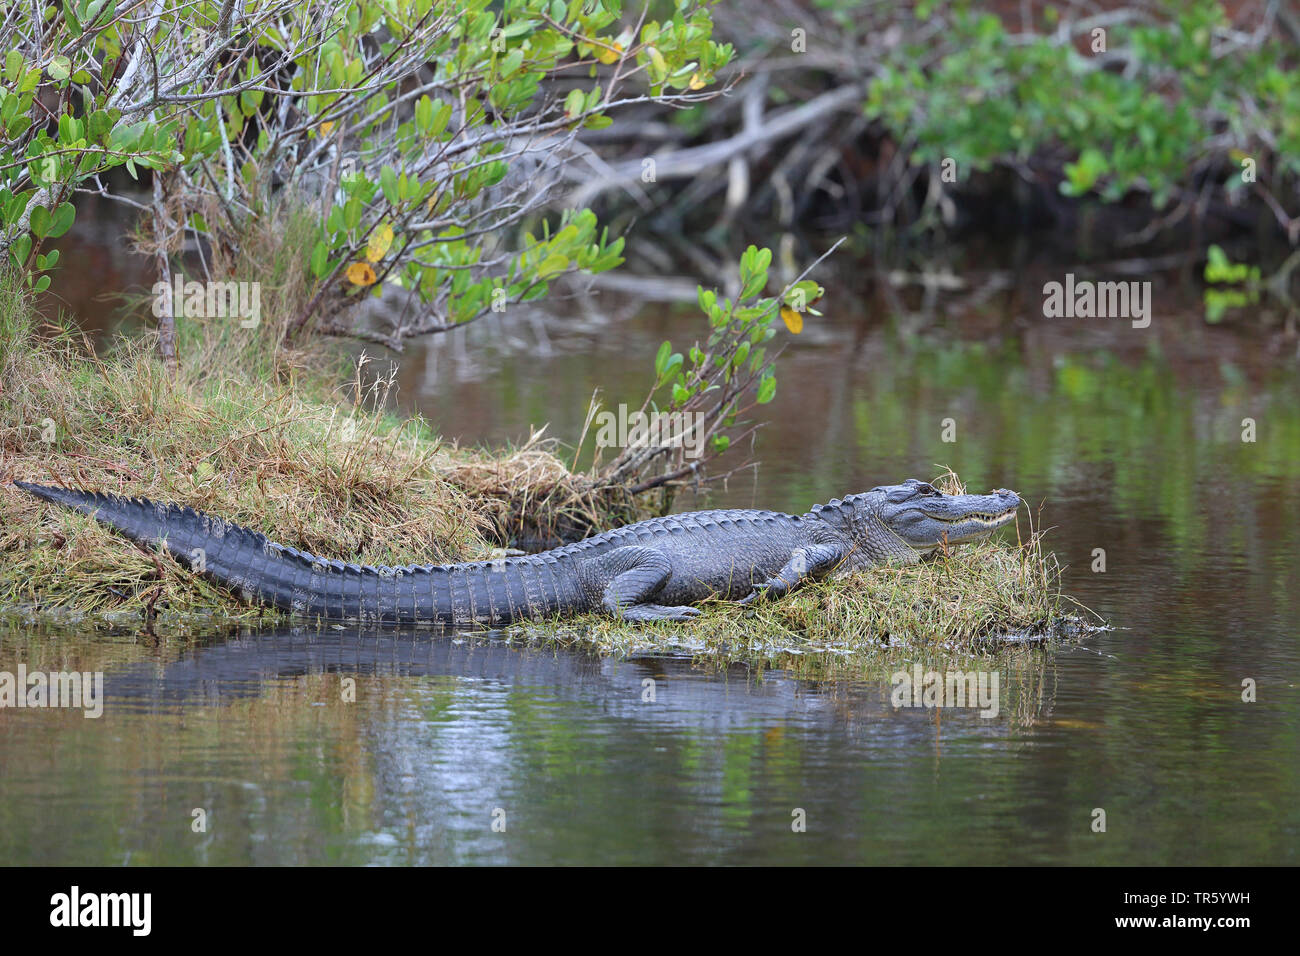 American alligator (Alligator mississippiensis), lying by the waterside in a mangrove, USA, Florida, Merritt Island National Wildlife Refuge Stock Photo